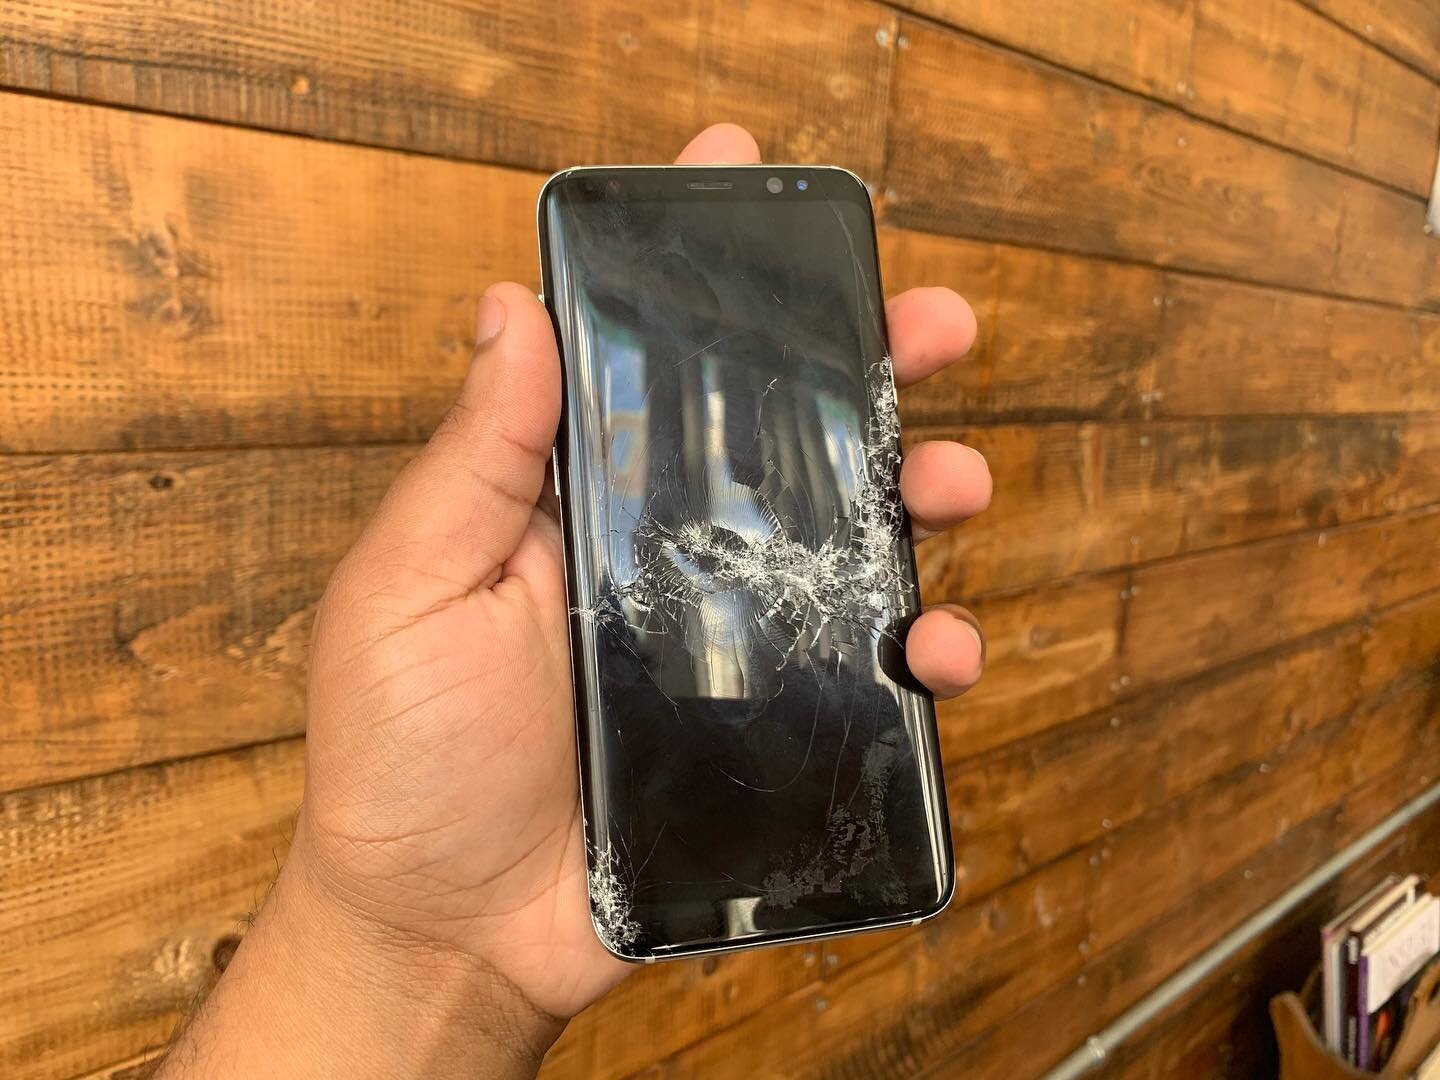 Samsung Galaxy S8 Screen Repair for Jake. Almost forgot to post a Repair today😅 A bit late but we always work overtime. Original Samsung Screen &amp; Backed by our Lifetime Warranty. 📲Call, Text, or slide in our DMs to schedule an appointment. You 